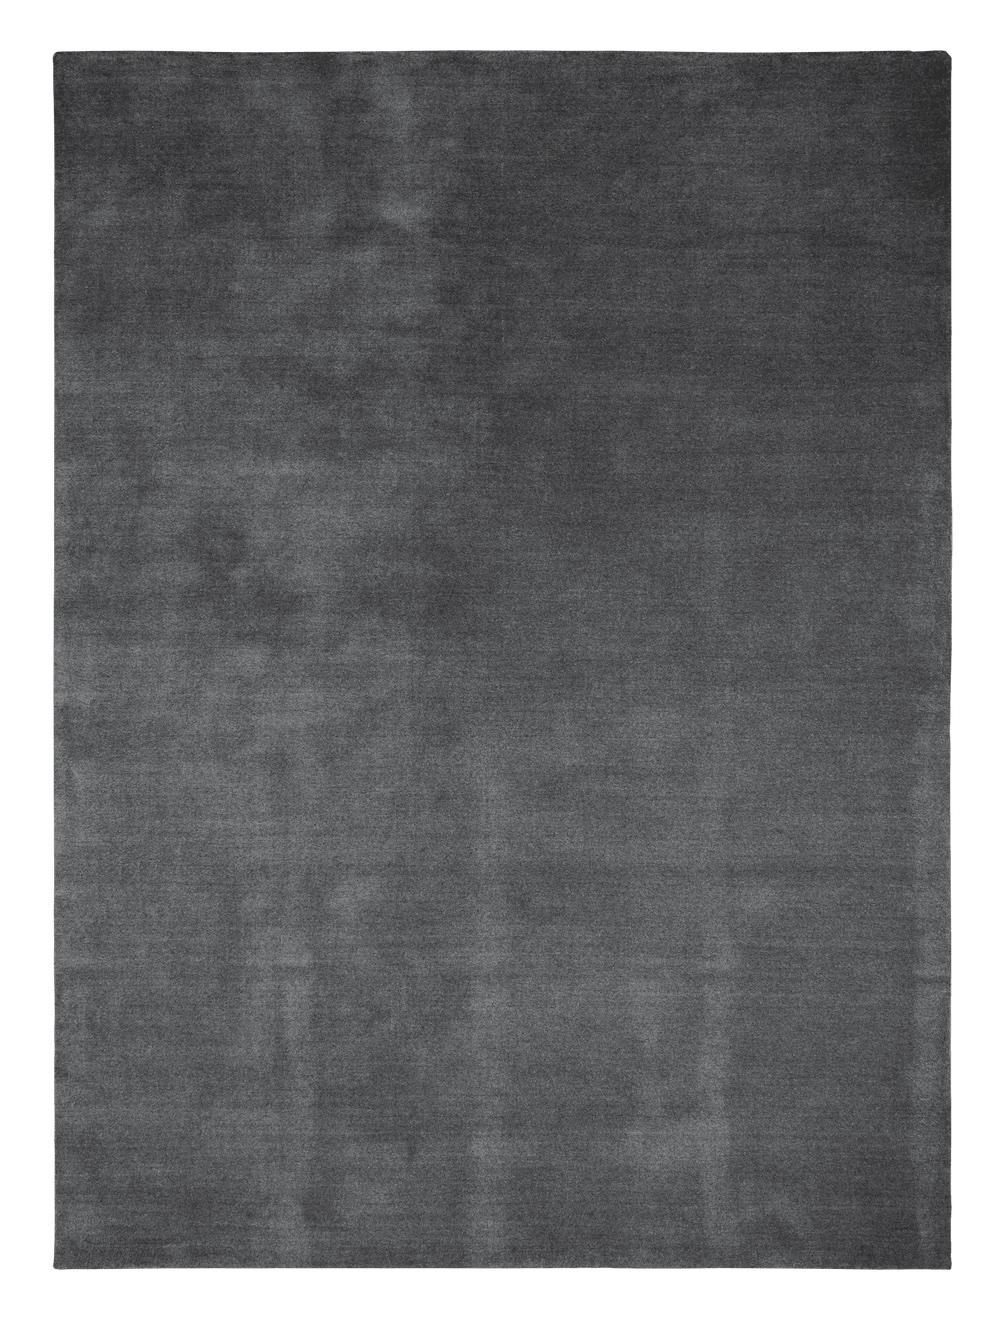 Dark grey earth natural carpet by Massimo Copenhagen.
Handwoven.
Materials: 100% Undyed New Zealand wool.
Dimensions: W 300 x H 400 cm.
Available colors: ivory, silver grey, light beige, light grey, and dark grey.
Other dimensions are